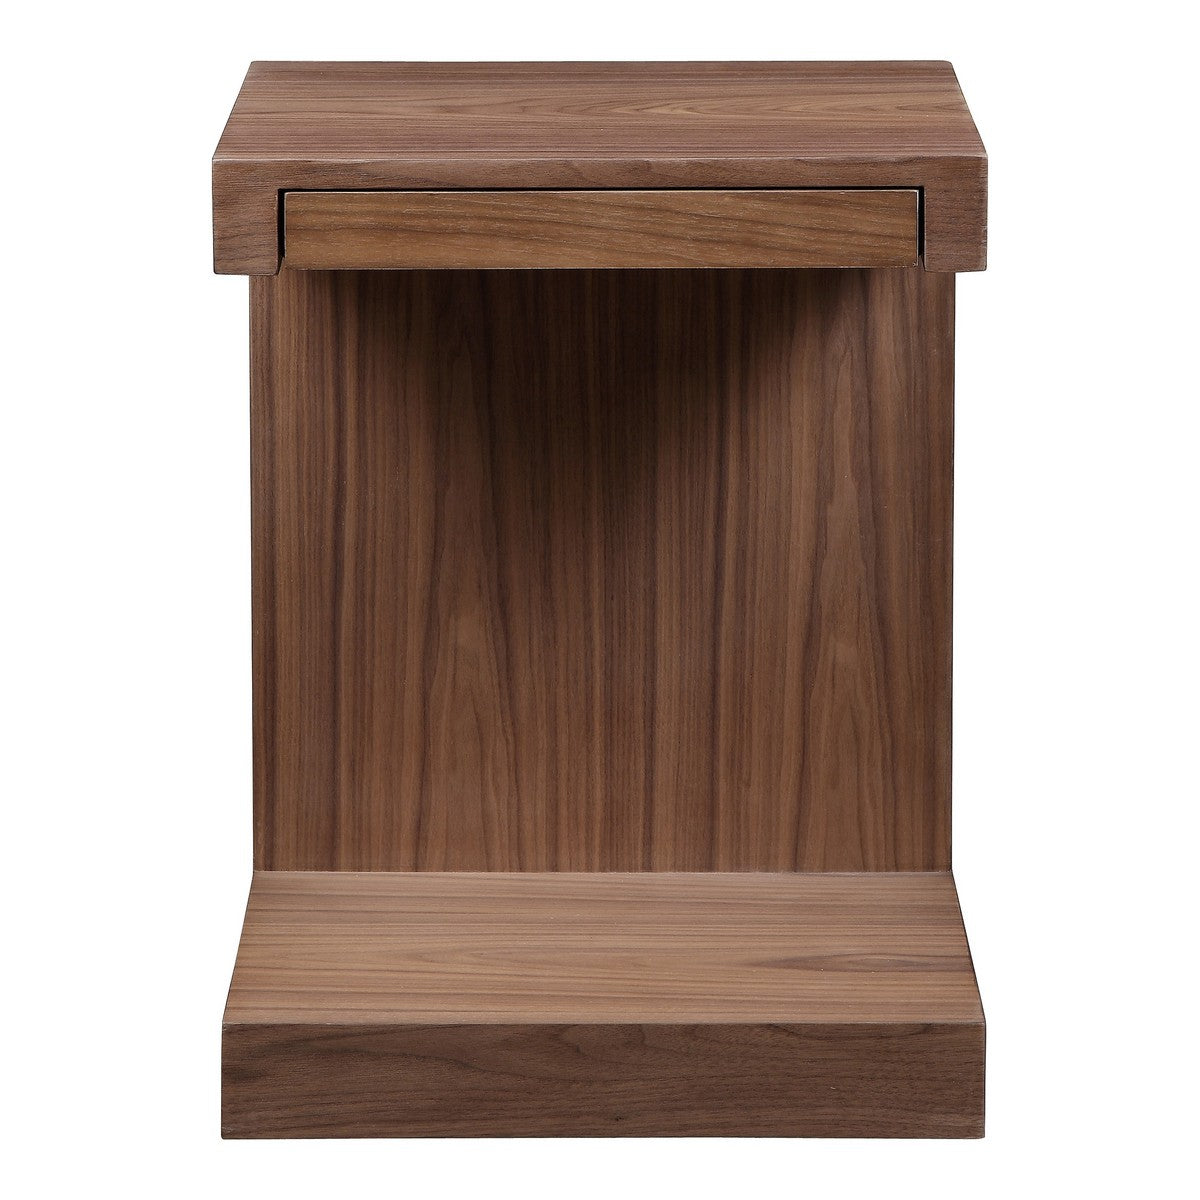 Moe's Home Collection Zio Sidetable Walnut - AD-1025-03 - Moe's Home Collection - side tables - Minimal And Modern - 1